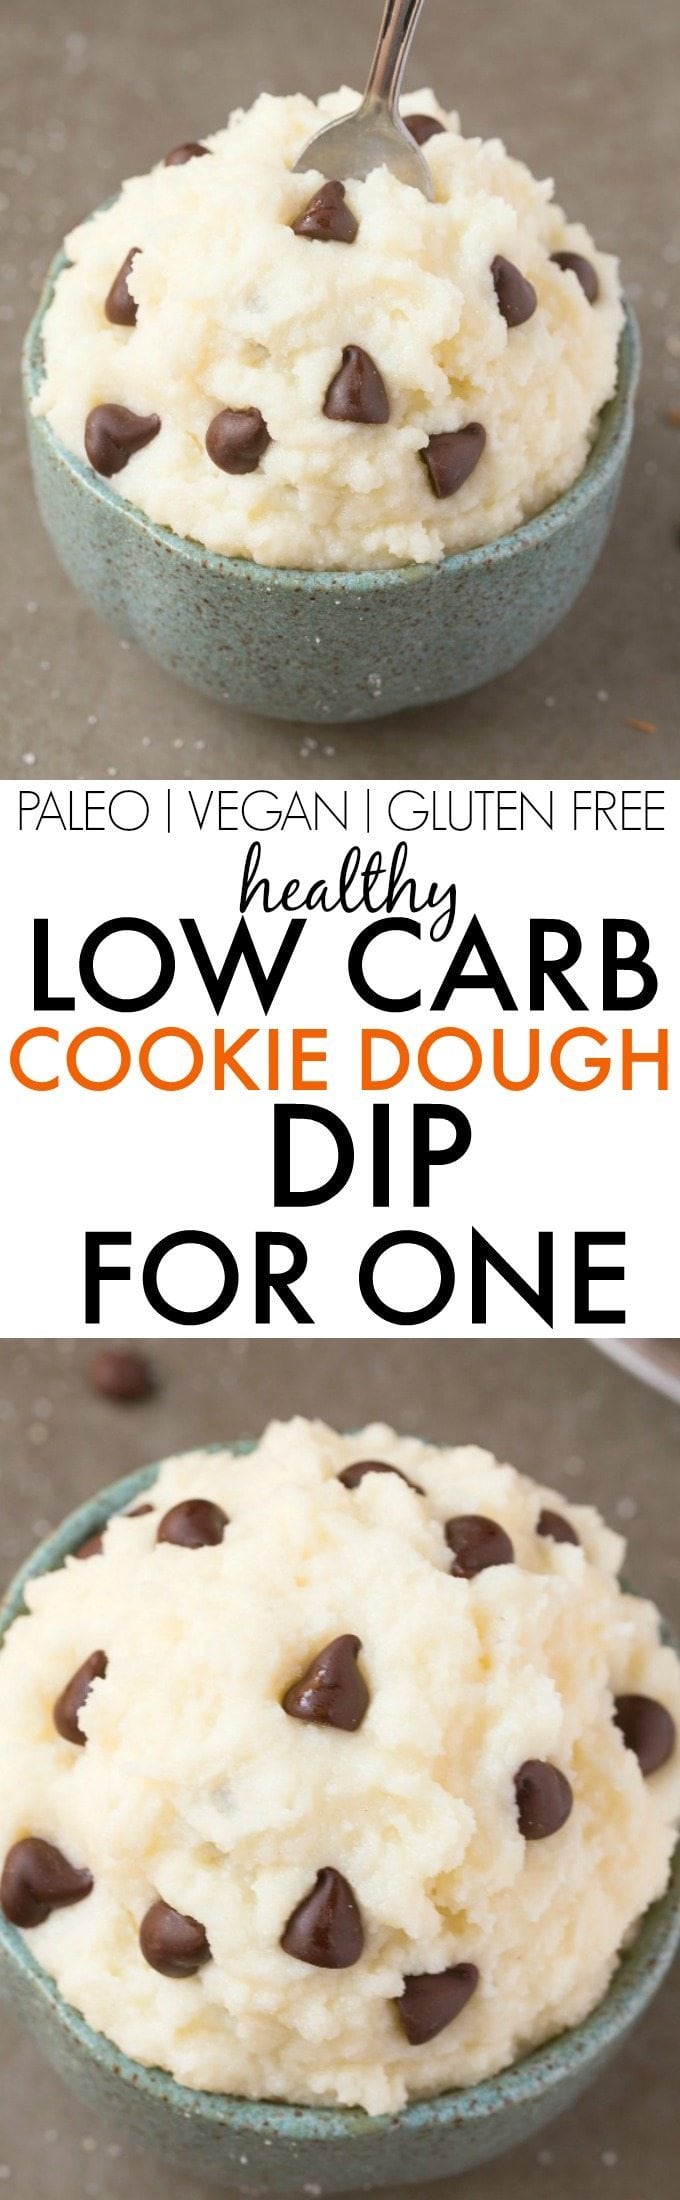 Healthy LOW CARB Cookie Dough Dip for ONE- A single serve, quick and easy dip which is thick, creamy and packed with protein- NO butter, sugar, dairy or cream! {vegan, gluten free, paleo recipe}- thebigmansworld.com